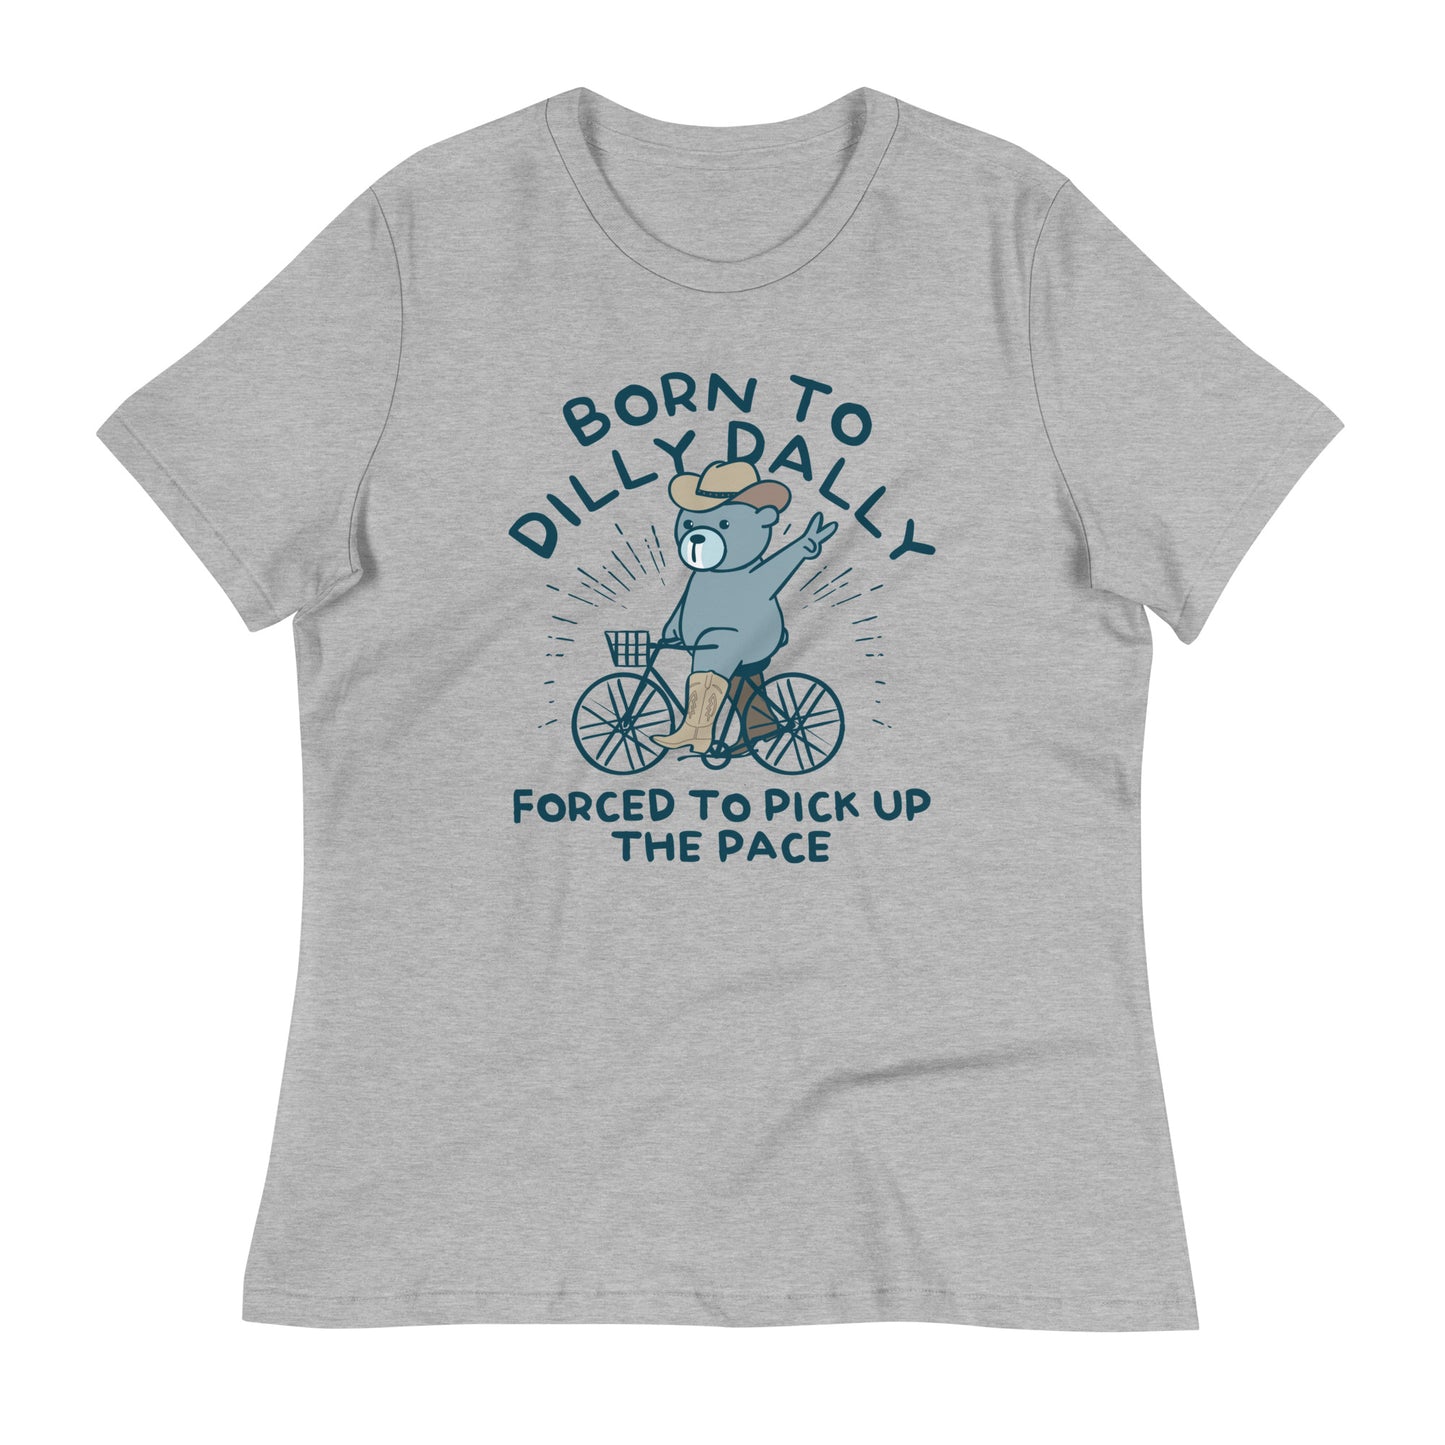 Born To Dilly Dally Forced To Pick Up The Pace Women's Signature Tee